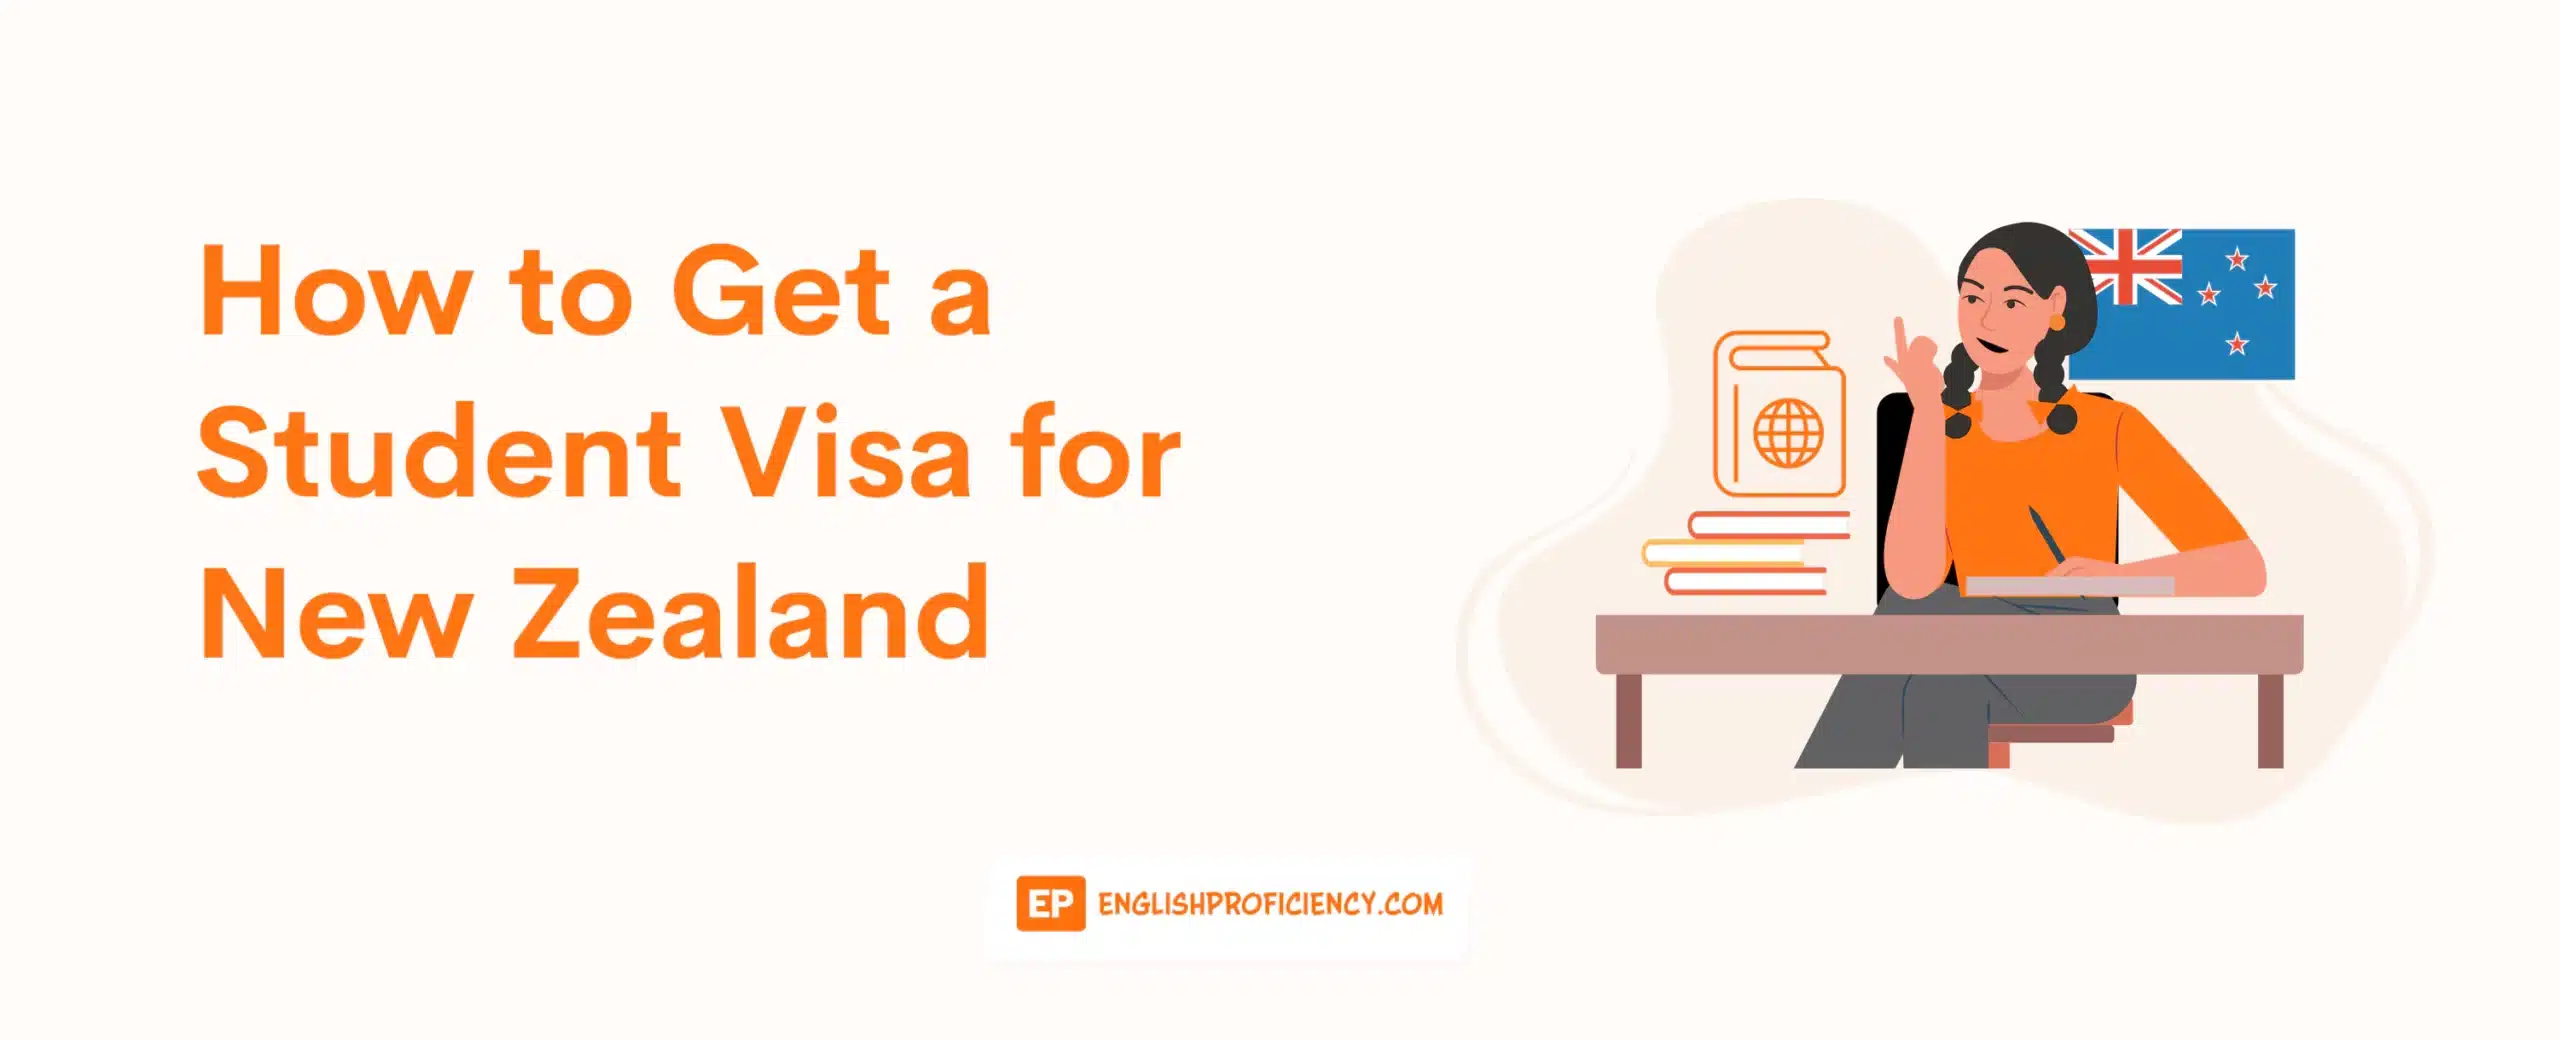 How to Get a Student Visa for New Zealand